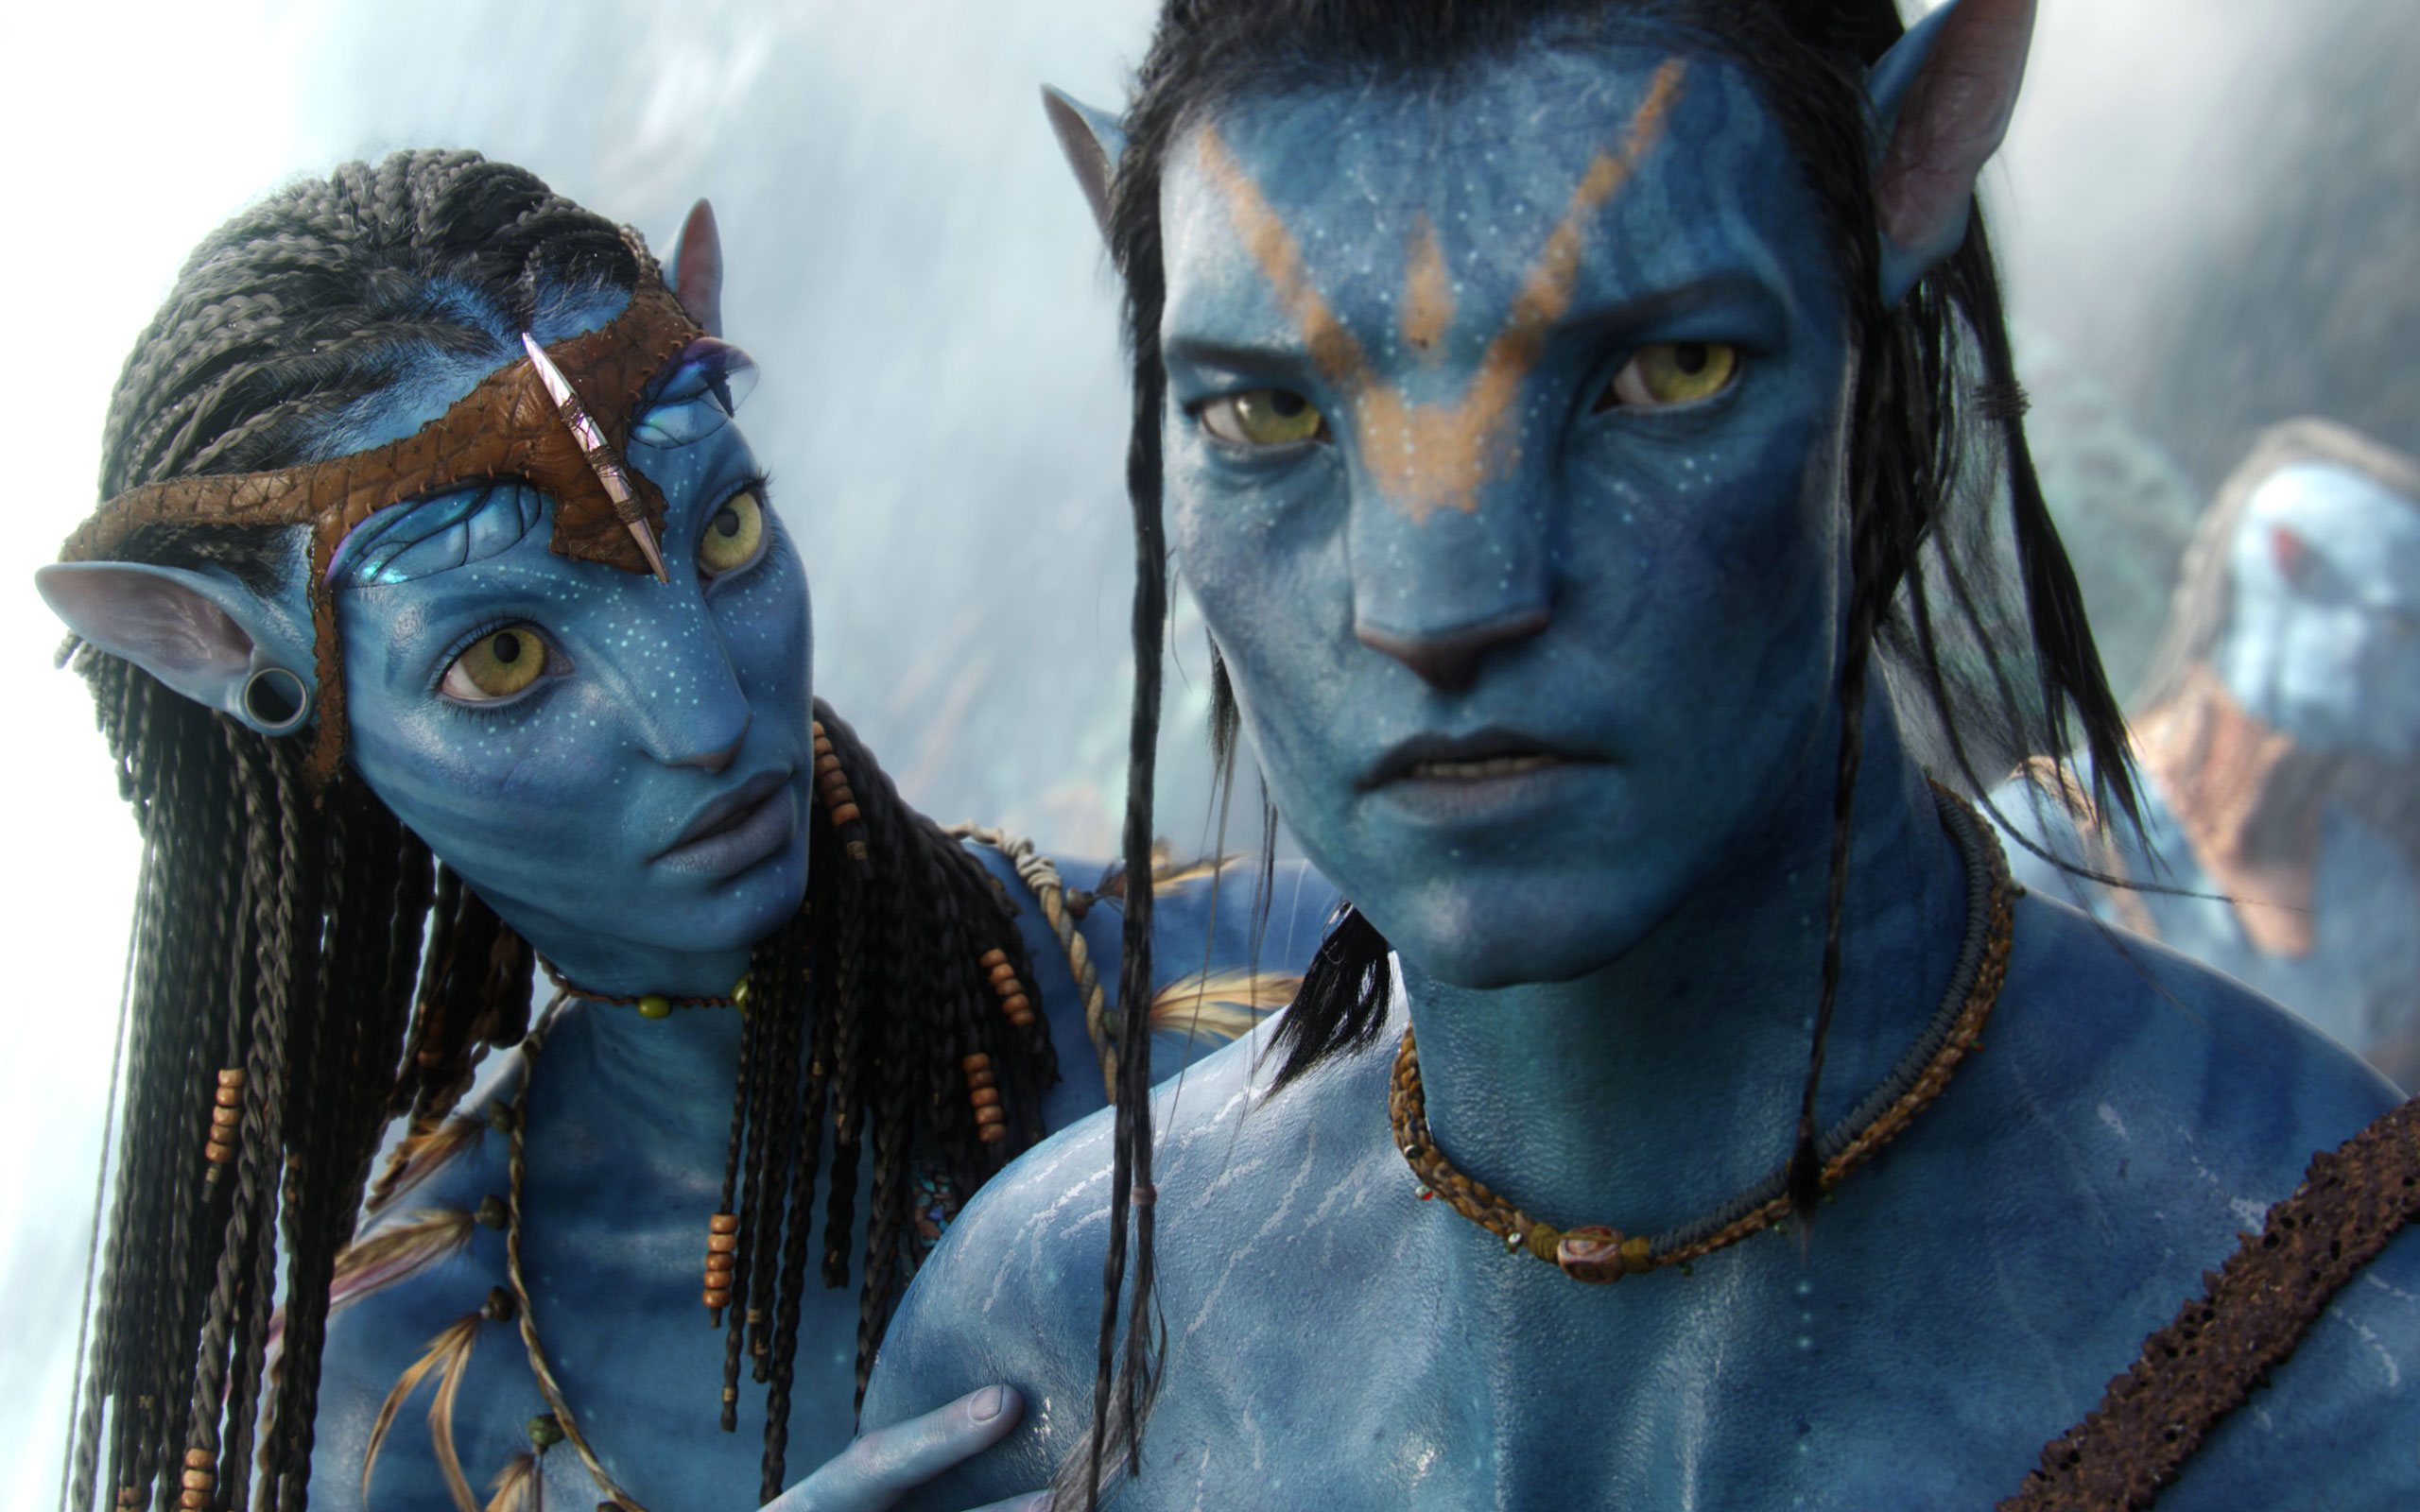 Amazing HD Wallpaper Of The 3d Epic Movie Avatar Leawo Official